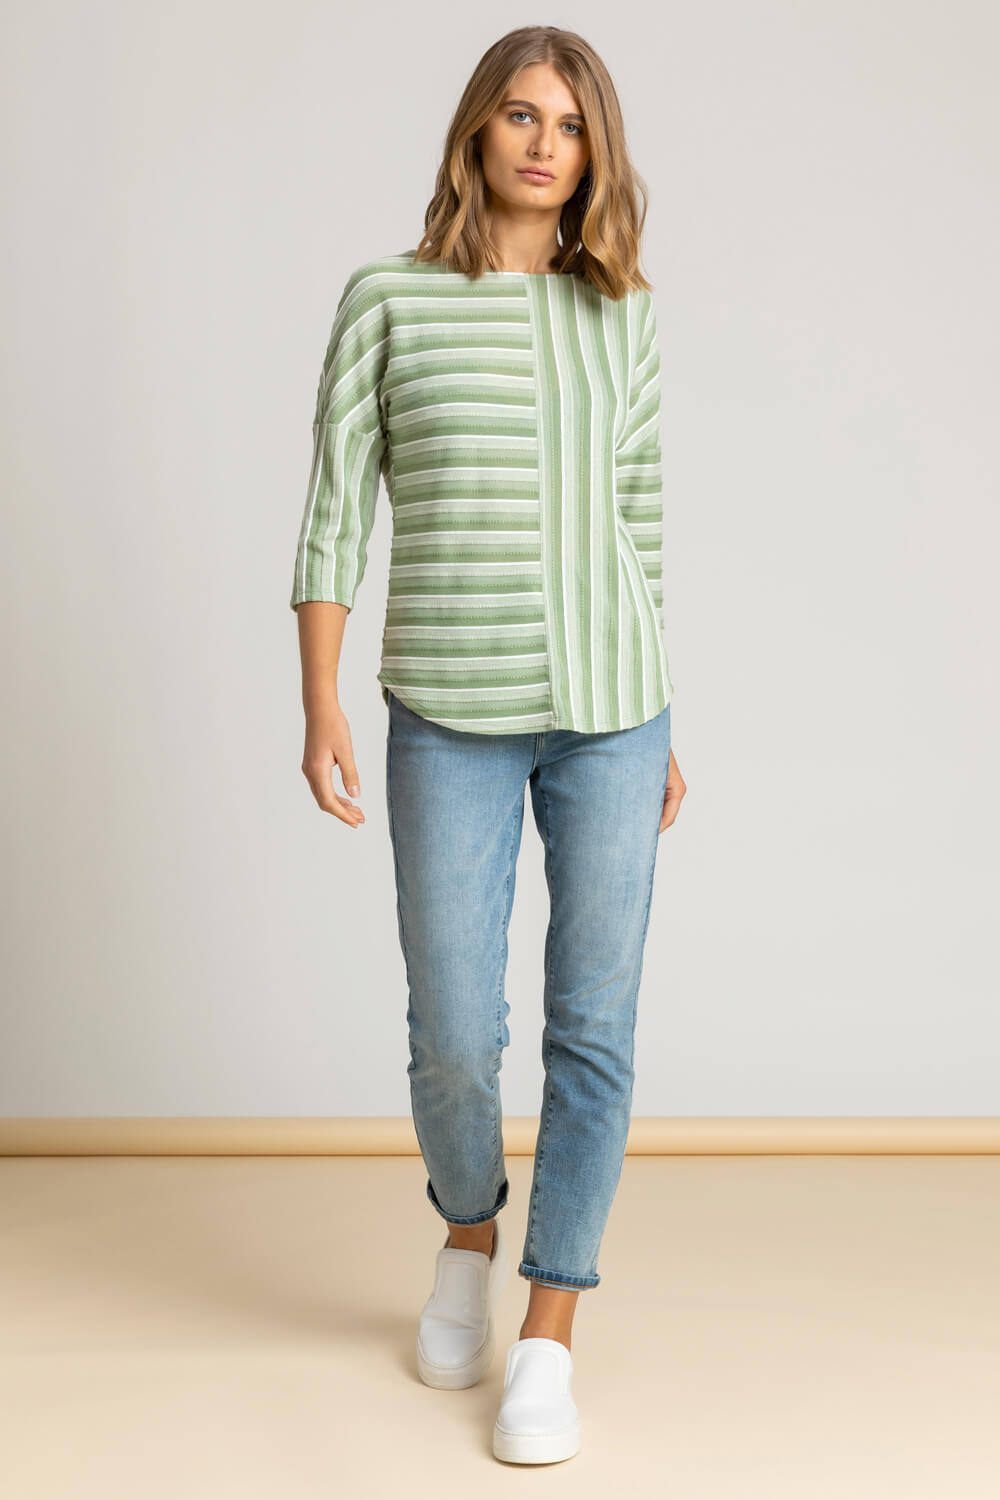 Green Textured Stripe Print Top, Image 3 of 4